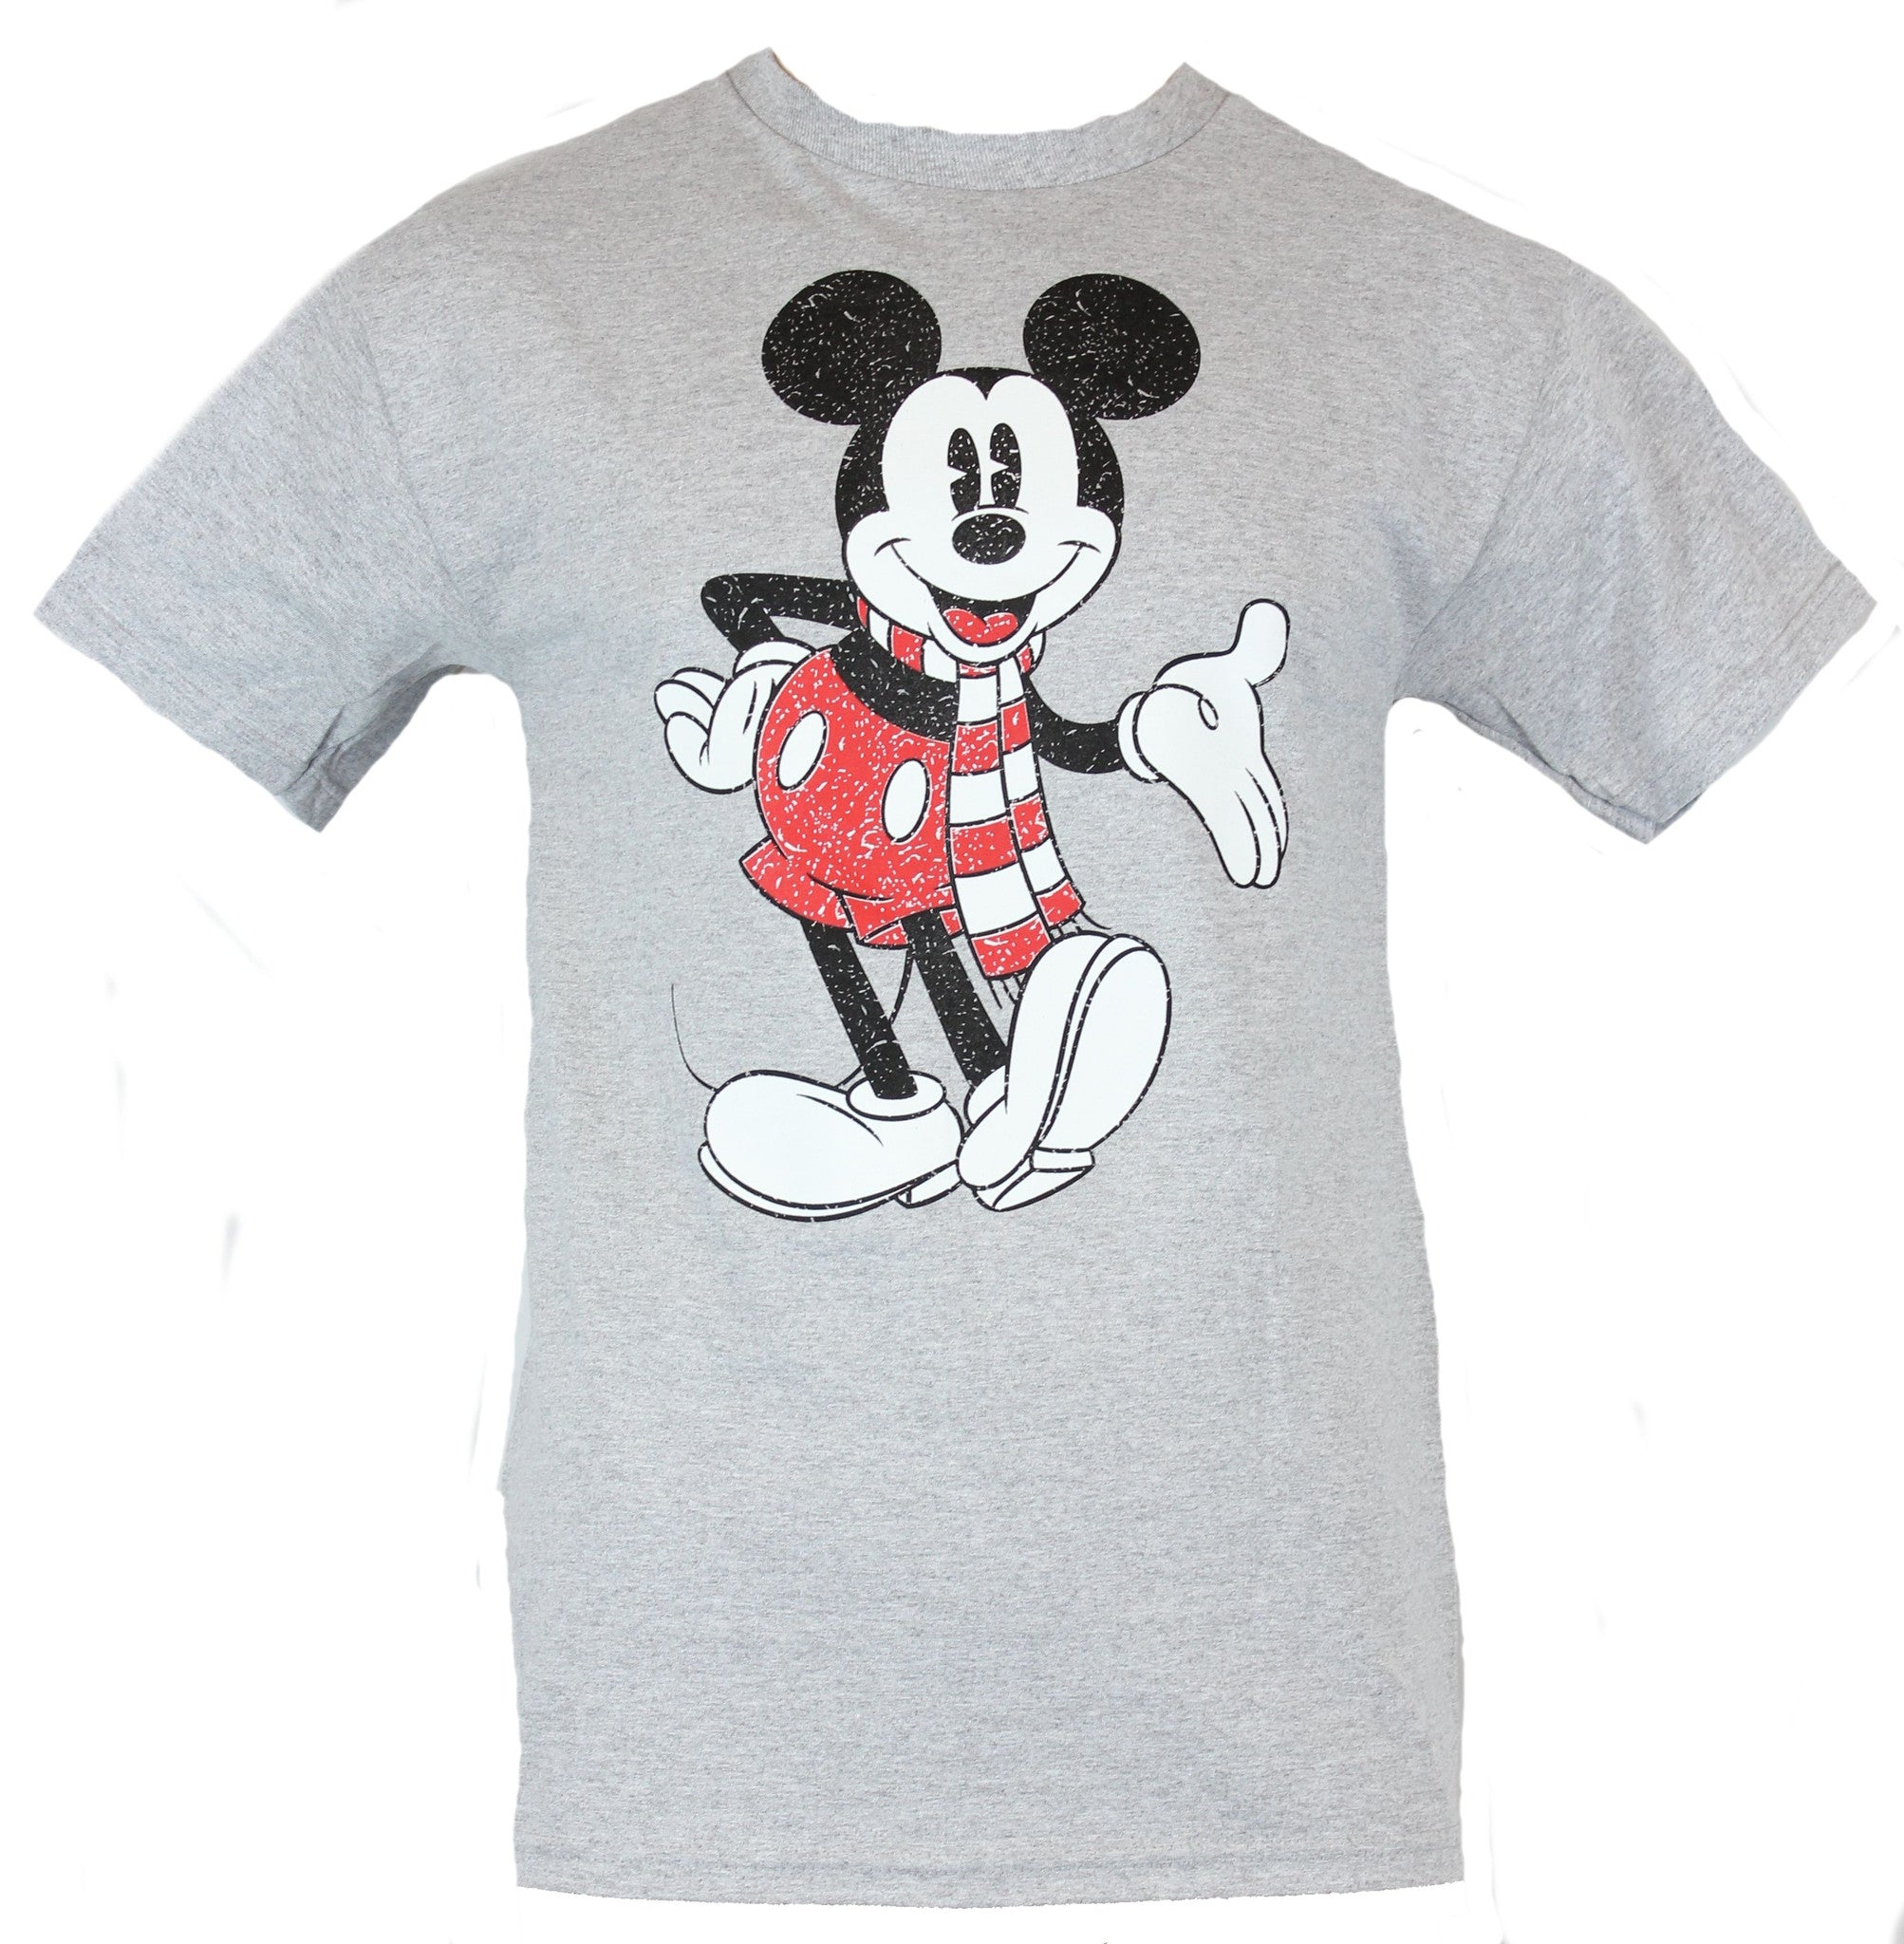 Mickey Mouse Disney Mens T-Shirt -  Distressed Happy Mickey in Scarf Image - Inmyparentsbasement.com